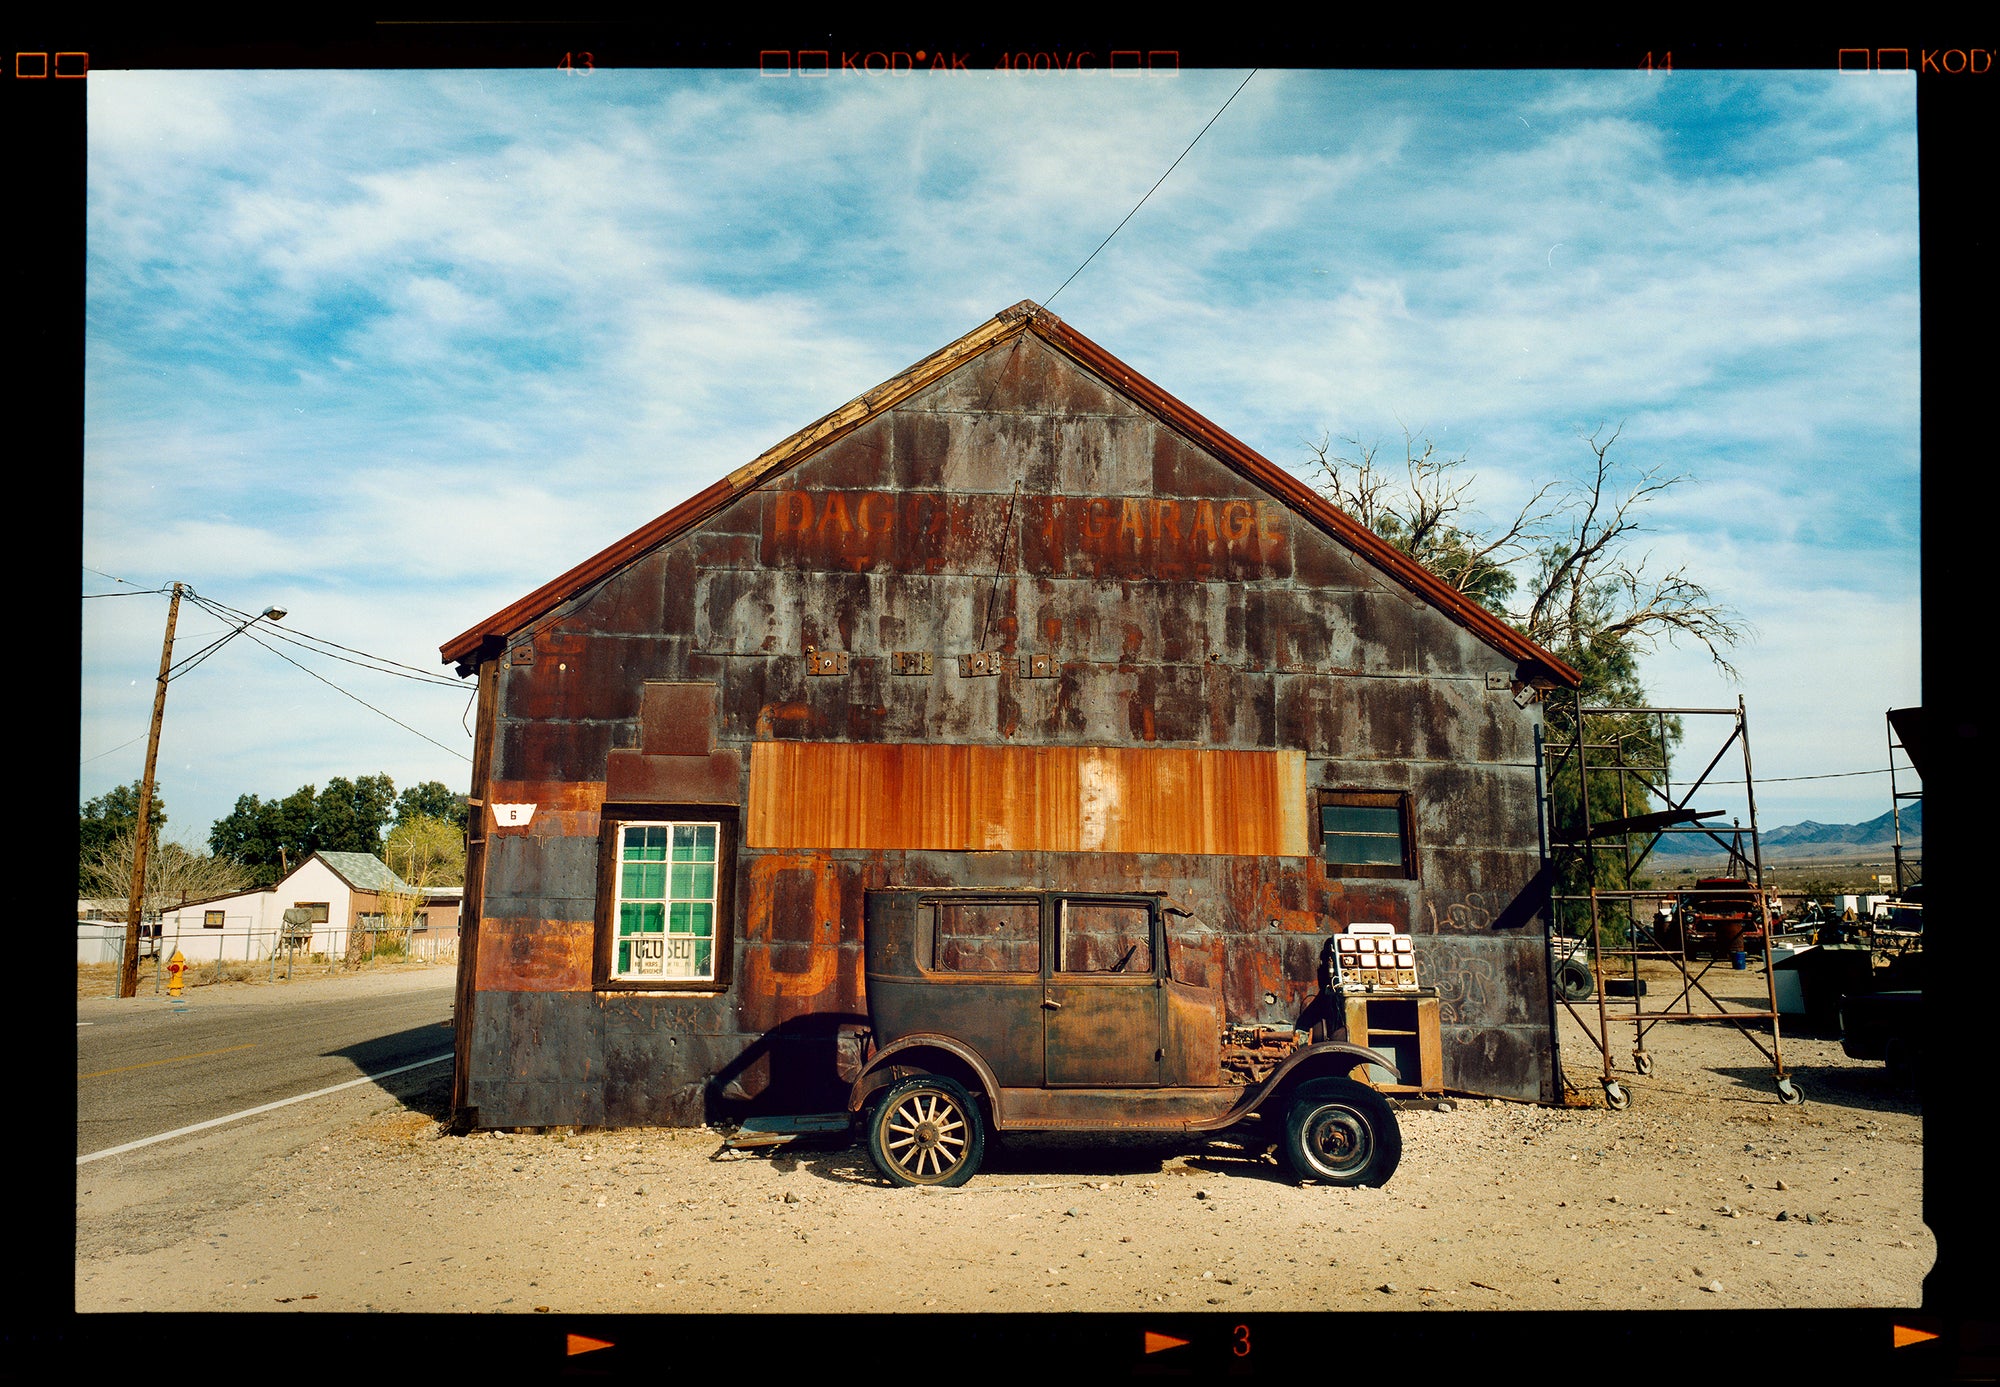 'Model T and Garage' was taken in the small historic town of Daggett in the Mojave Desert on Route 66. This piece is part of Richard Heeps' 'Dream in Colour' series, which documents his road trip journey from LA to Las Vegas.